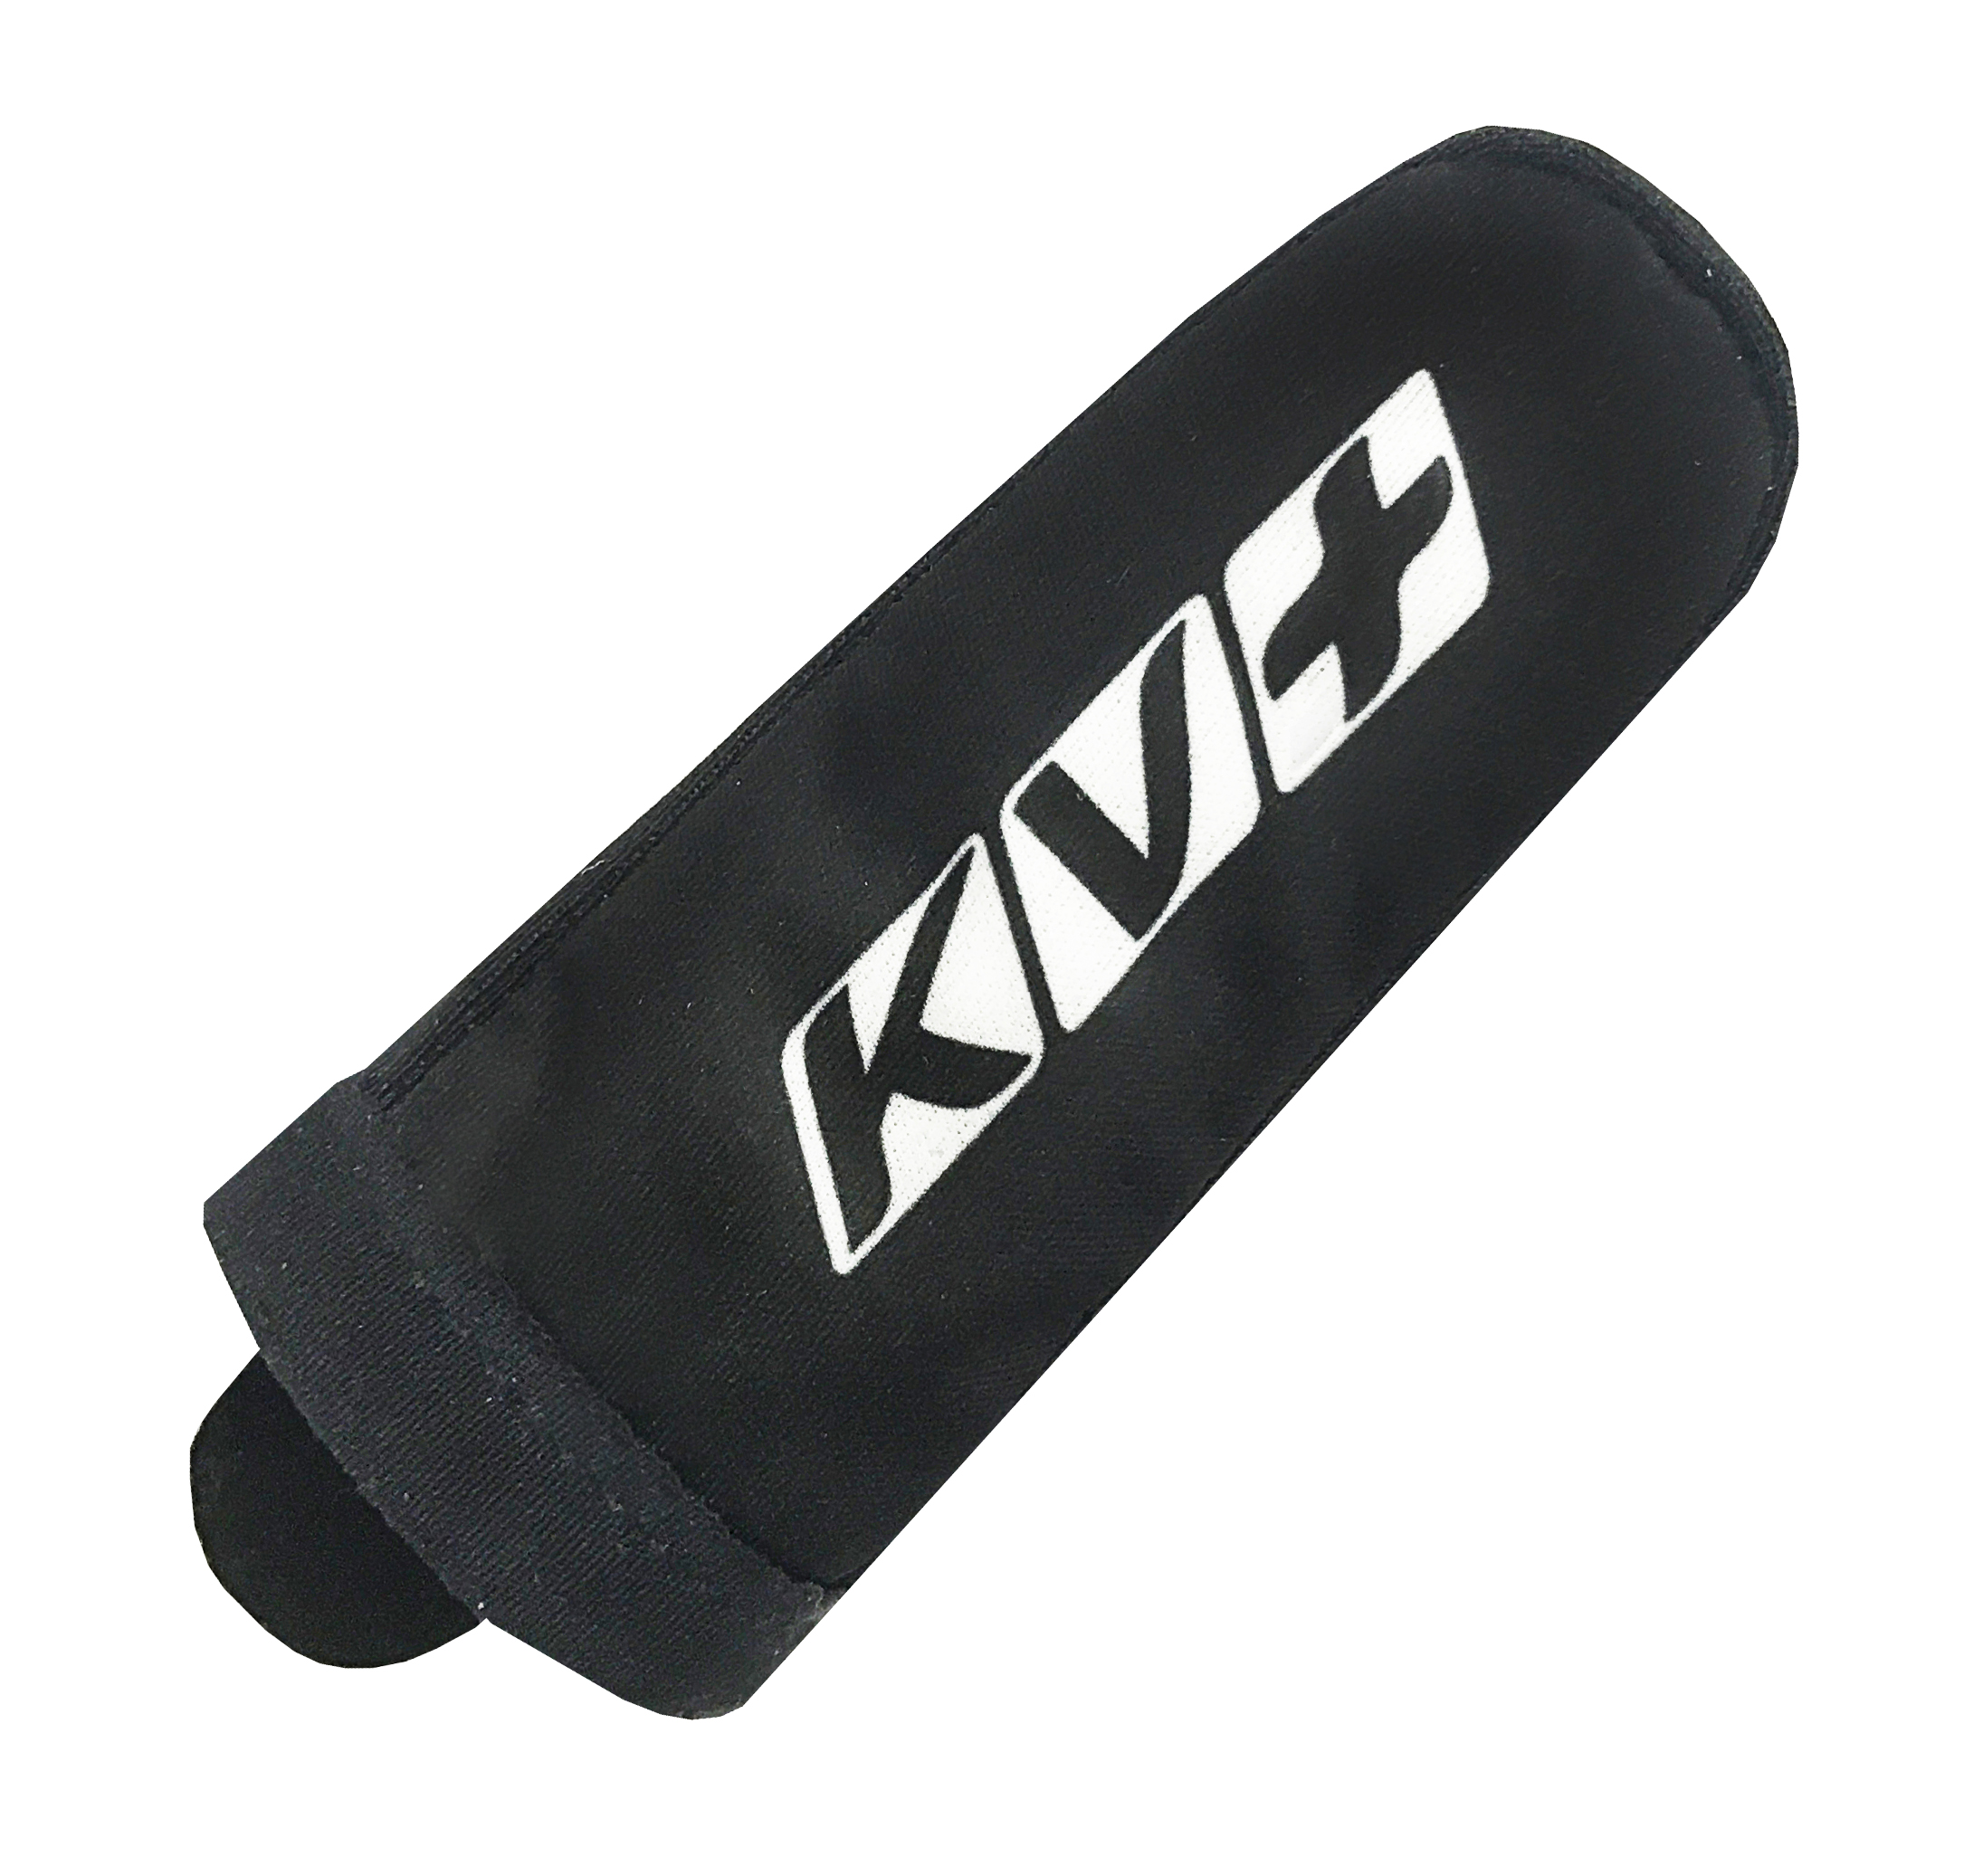 FINGER COVER for touch screen (Black)